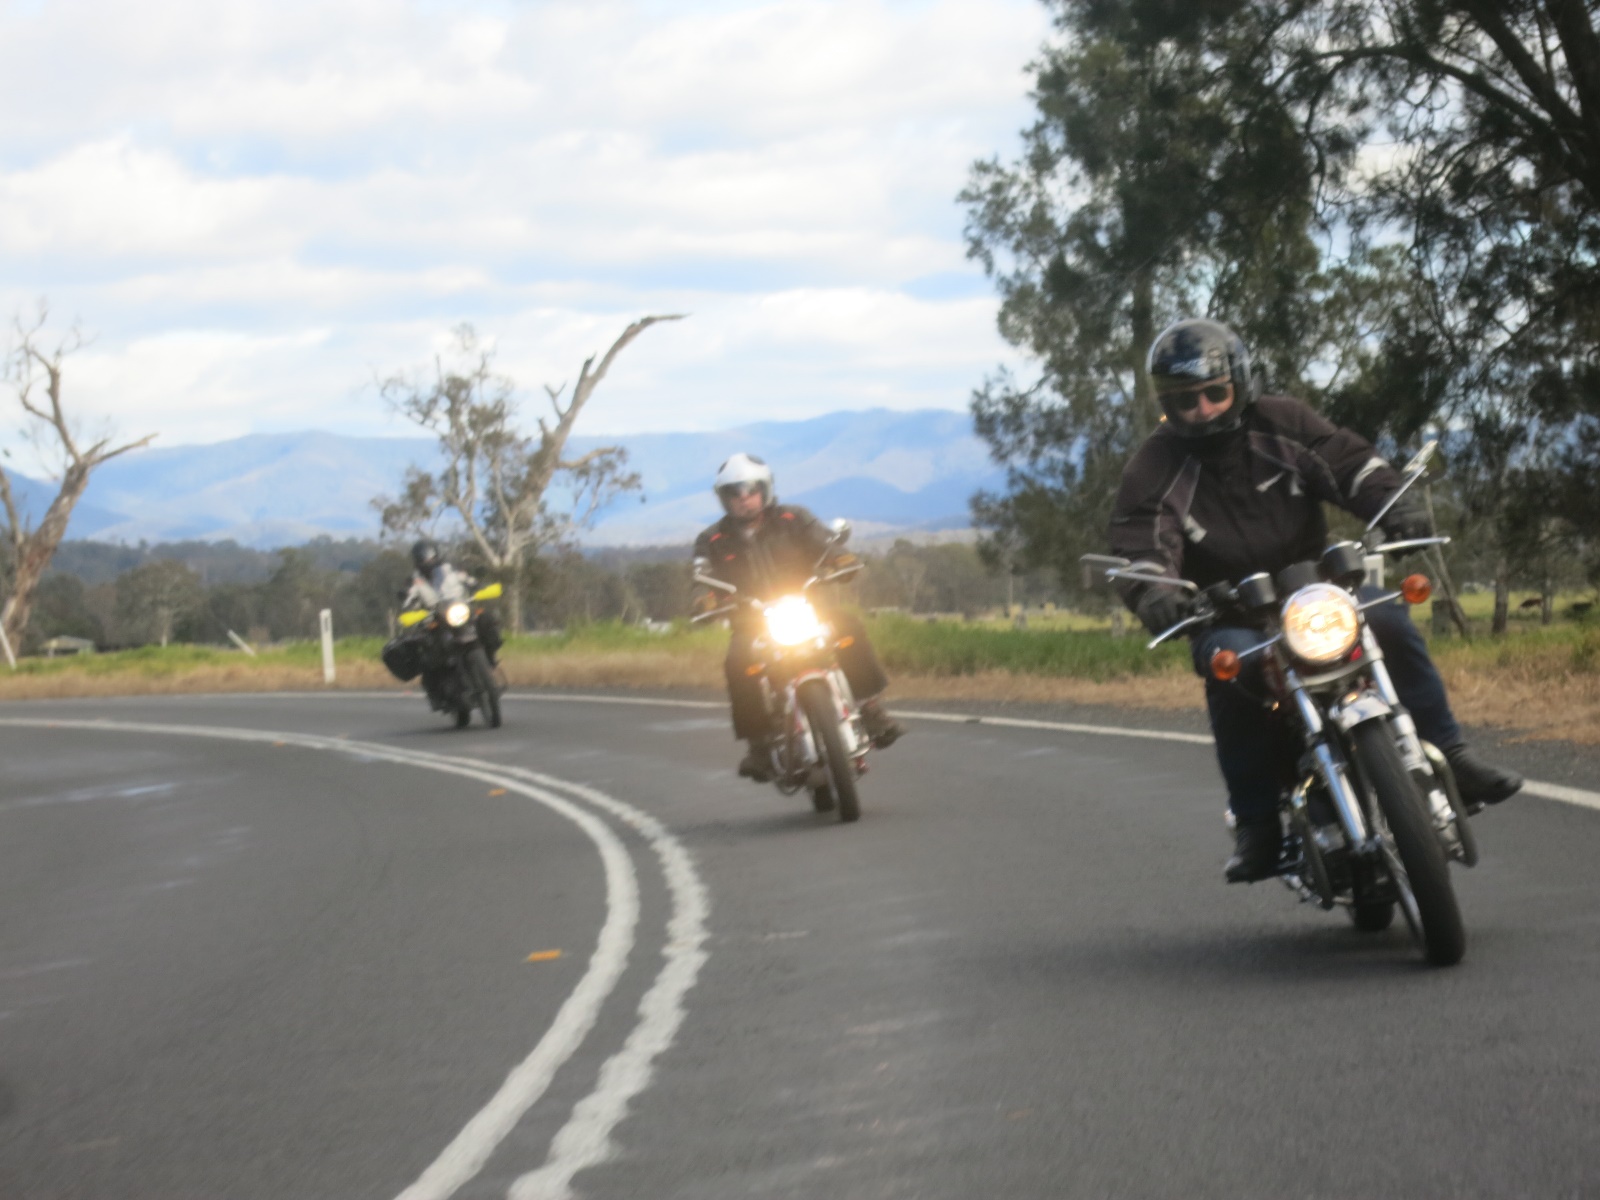 A group of people ride motorcycles down a road Description automatically generated with medium confidence